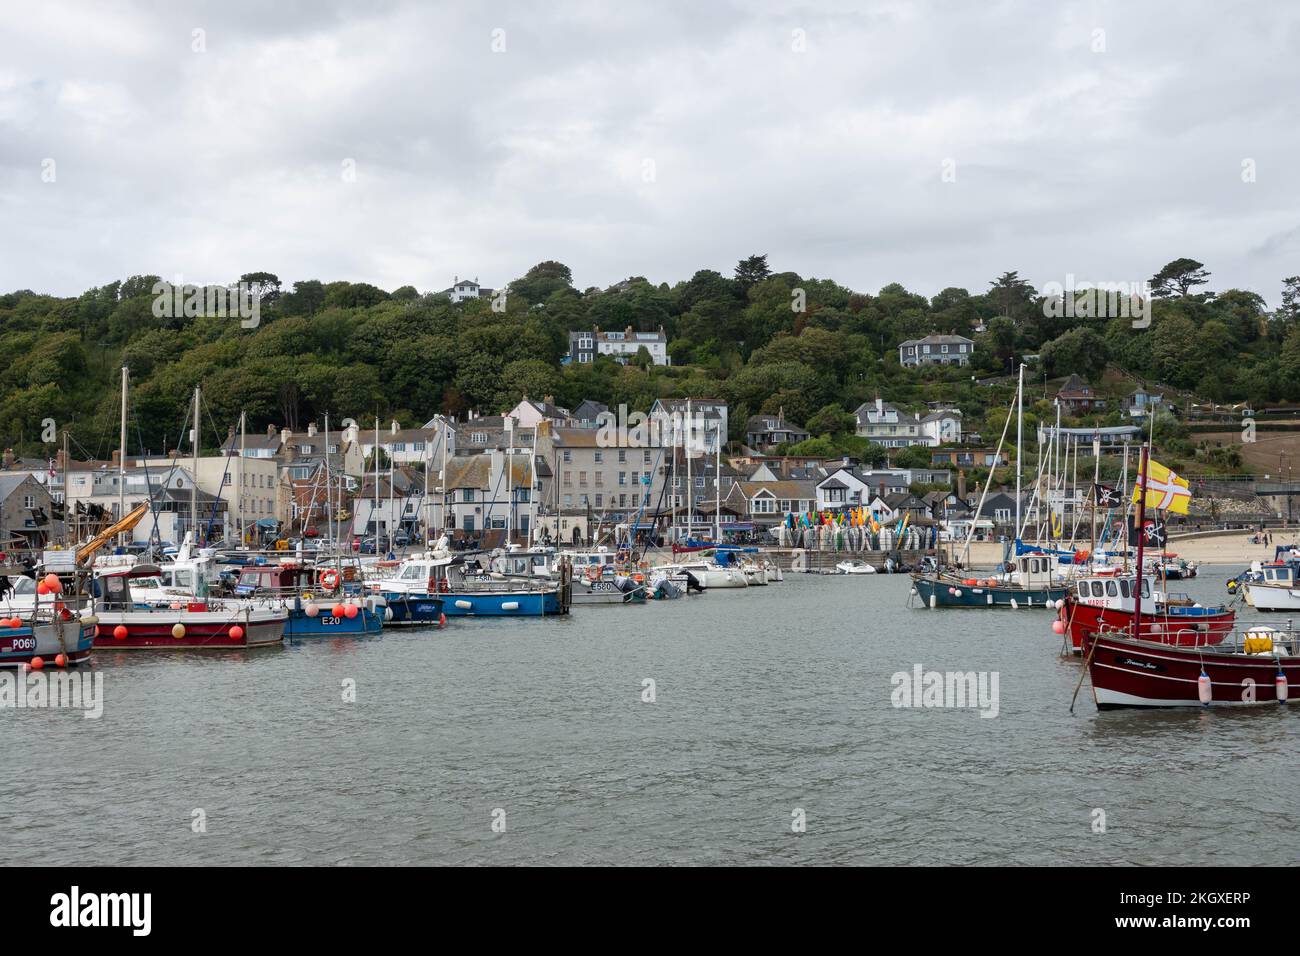 view of fishing boats in the harbour at Lyme Regis Dorset England with the town in the background Stock Photo